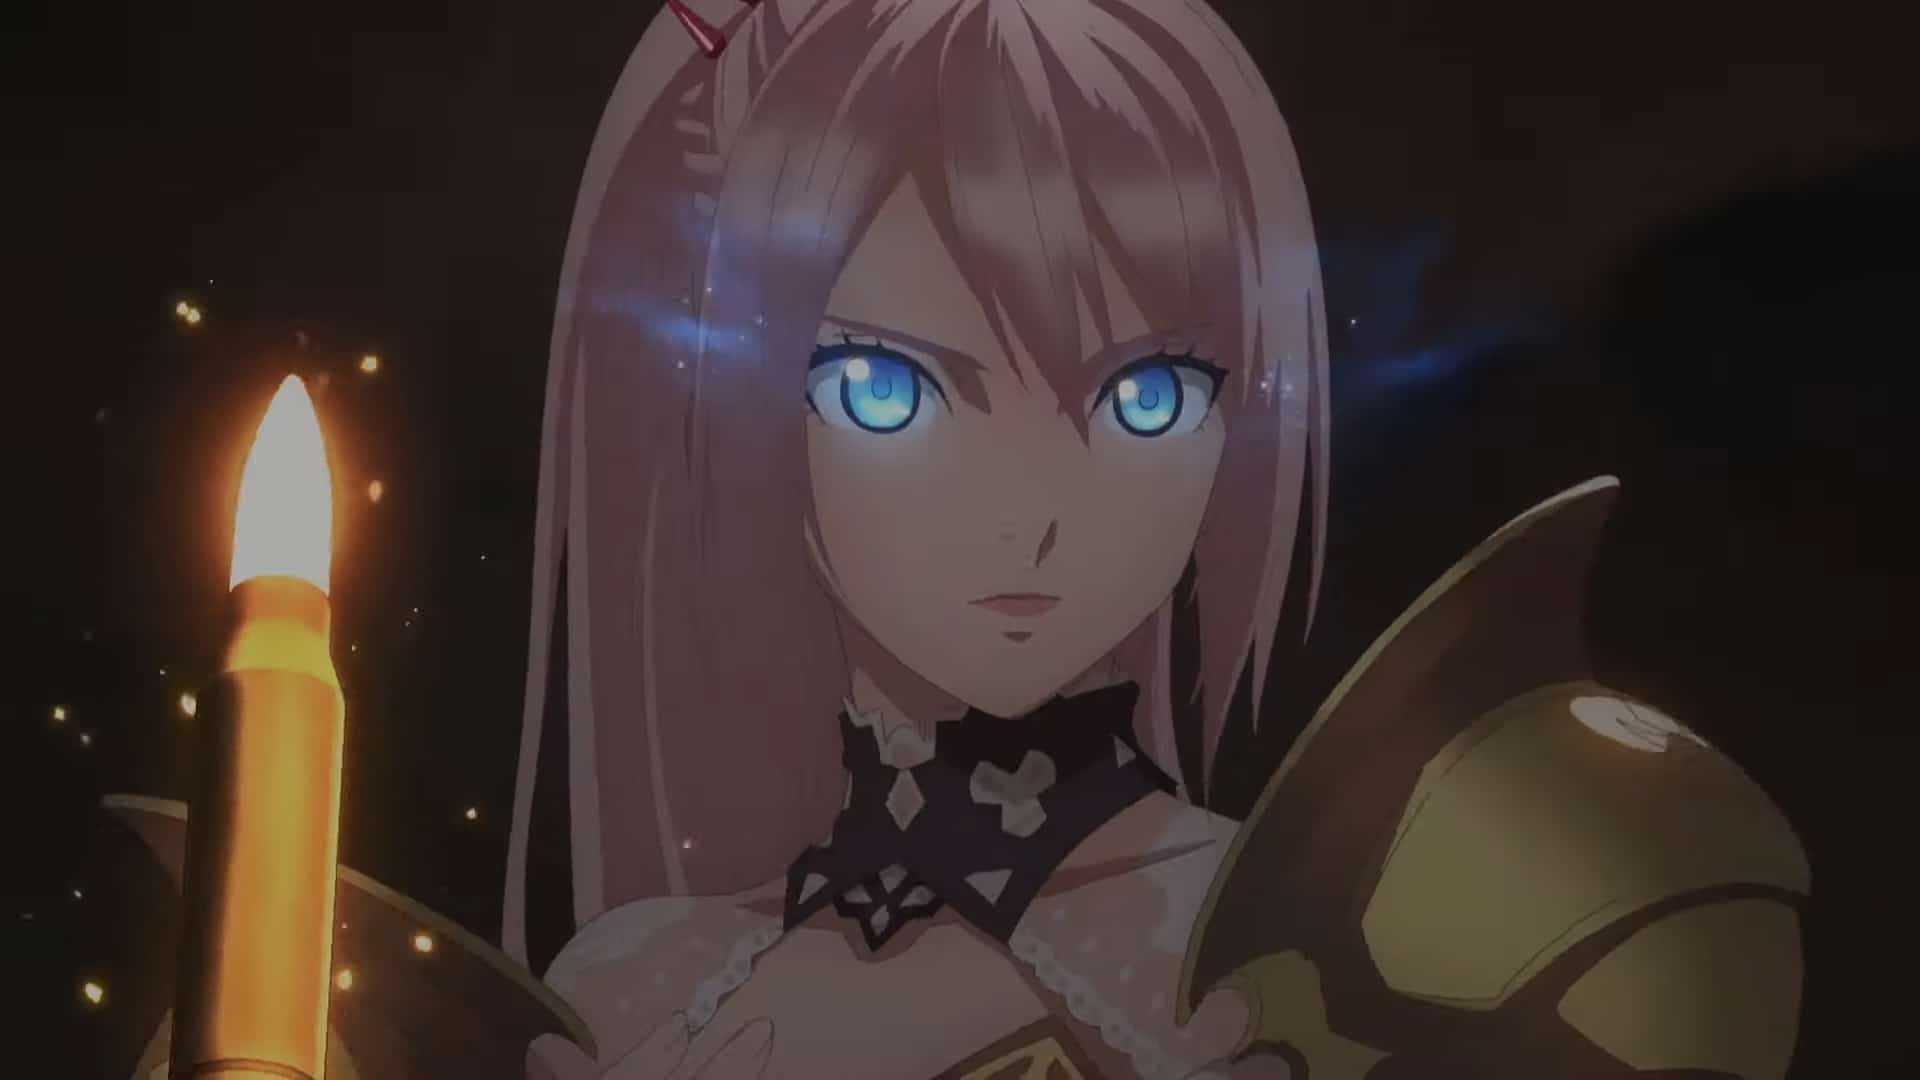 Tales of Arise Shares New Promotional Trailer Animated By Ufotable